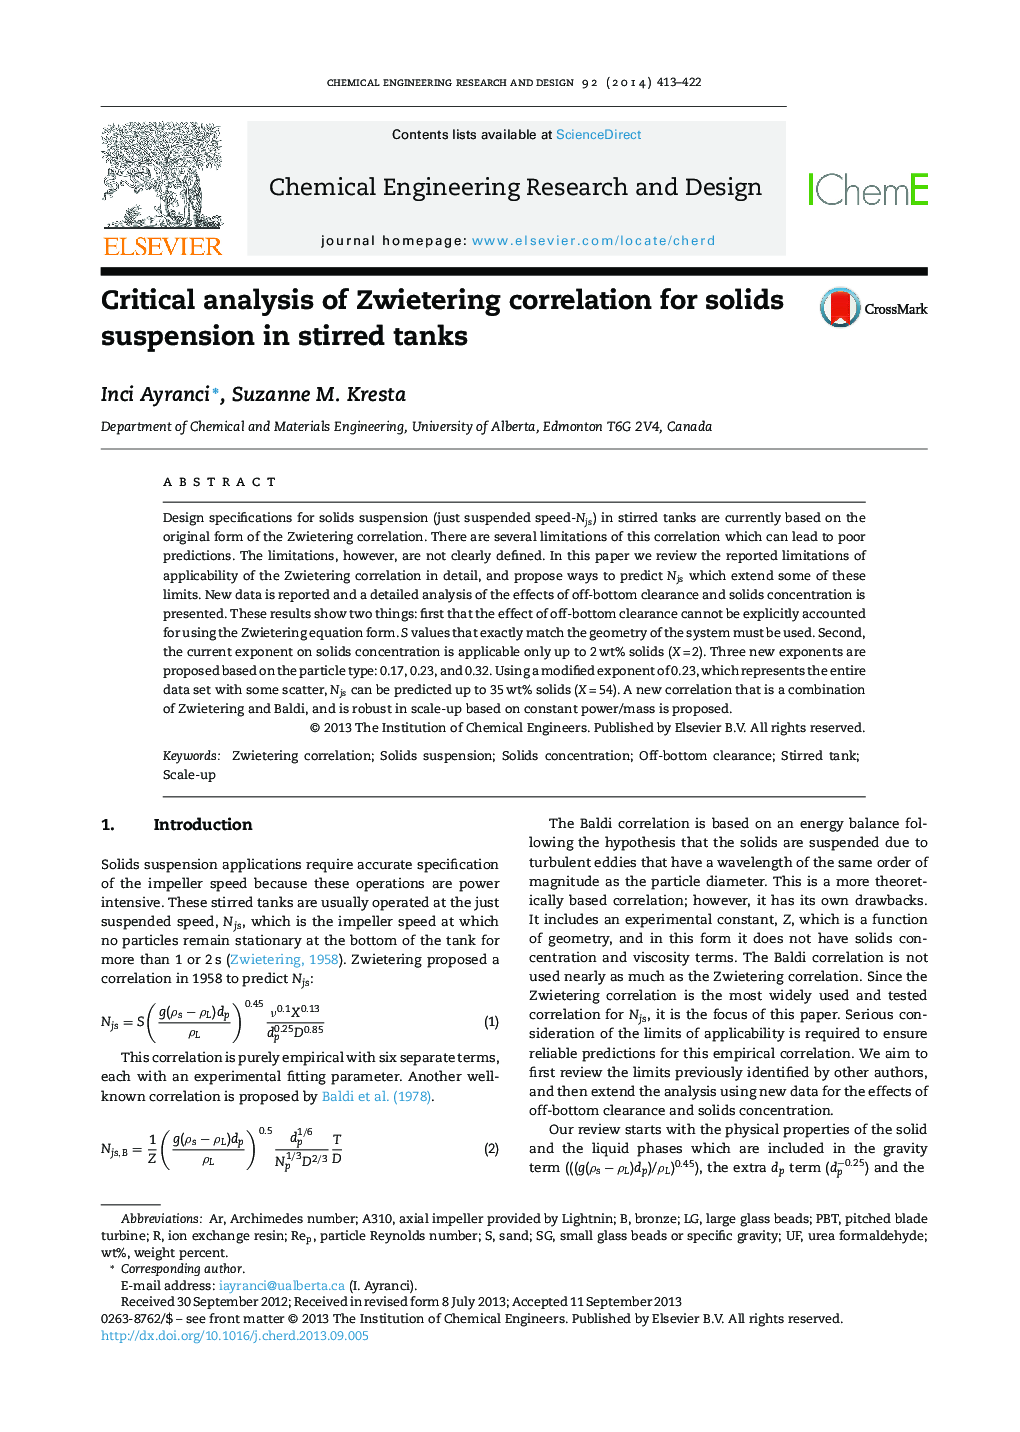 Critical analysis of Zwietering correlation for solids suspension in stirred tanks